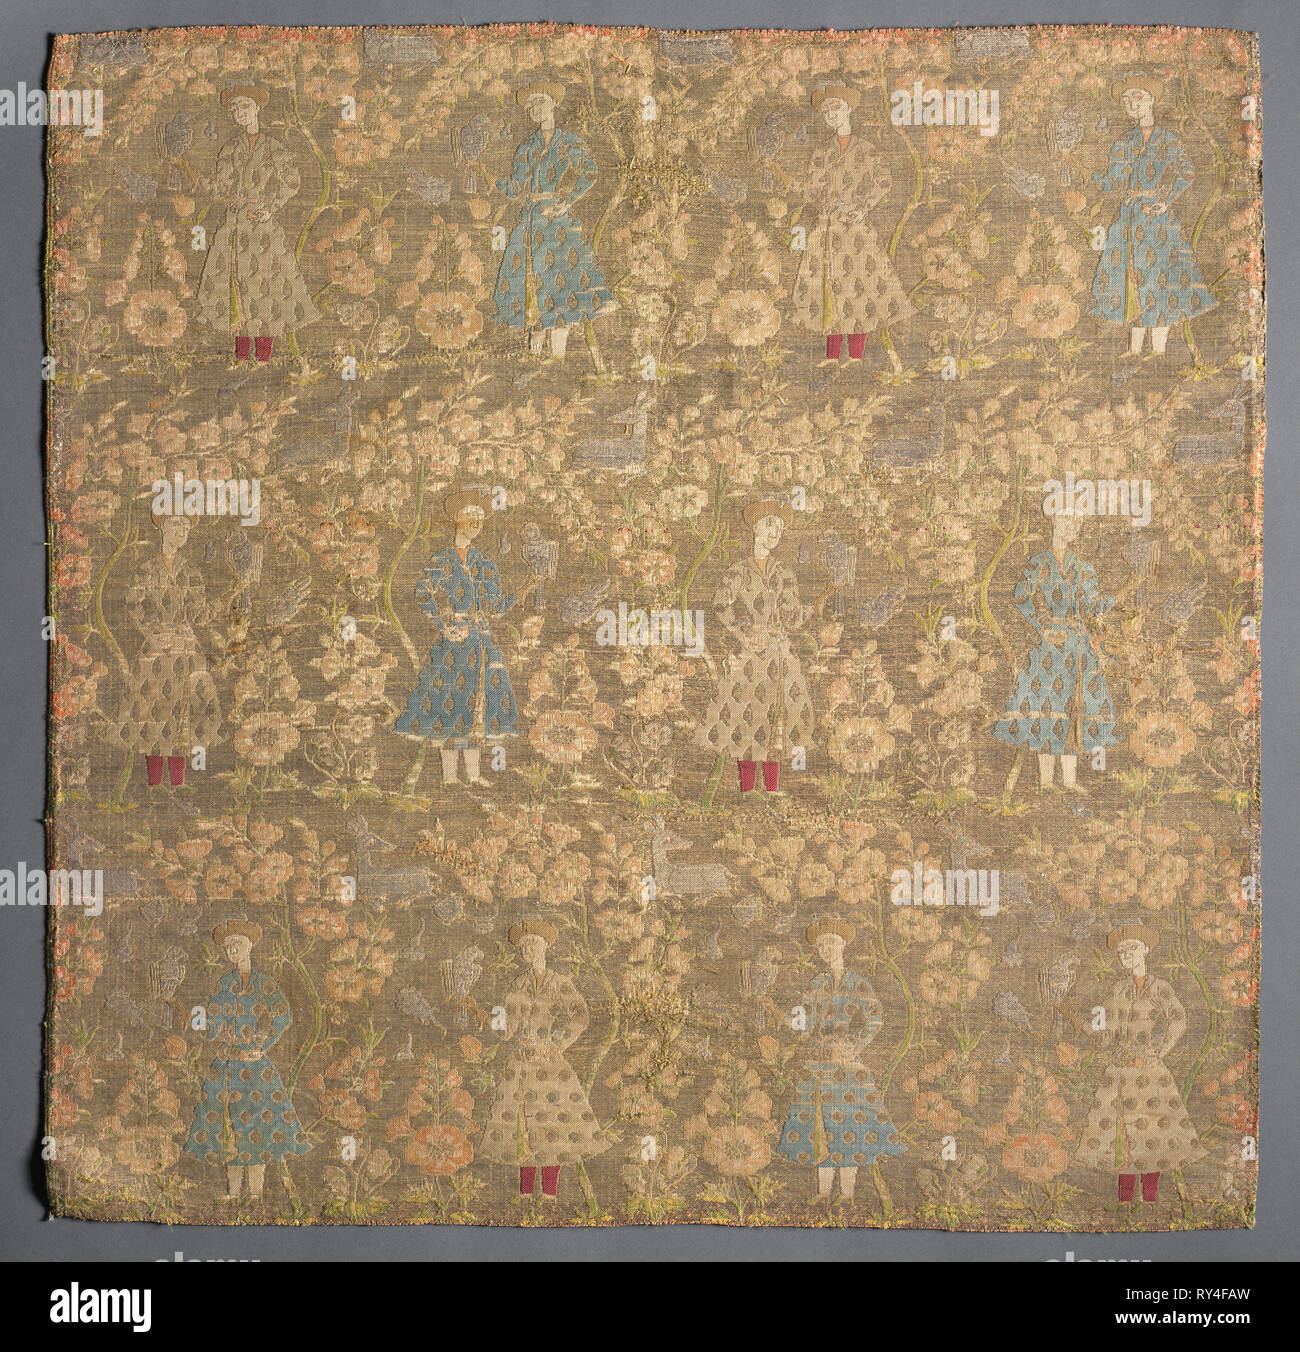 Twill weave with falconers amid rose bushes, 1650-1699. Iran, Safavid period (1501-1722). Twill weave with complementary and discontinuous weft: silk and silver-metal thread; overall: 47.7 x 47.7 cm (18 3/4 x 18 3/4 in Stock Photo